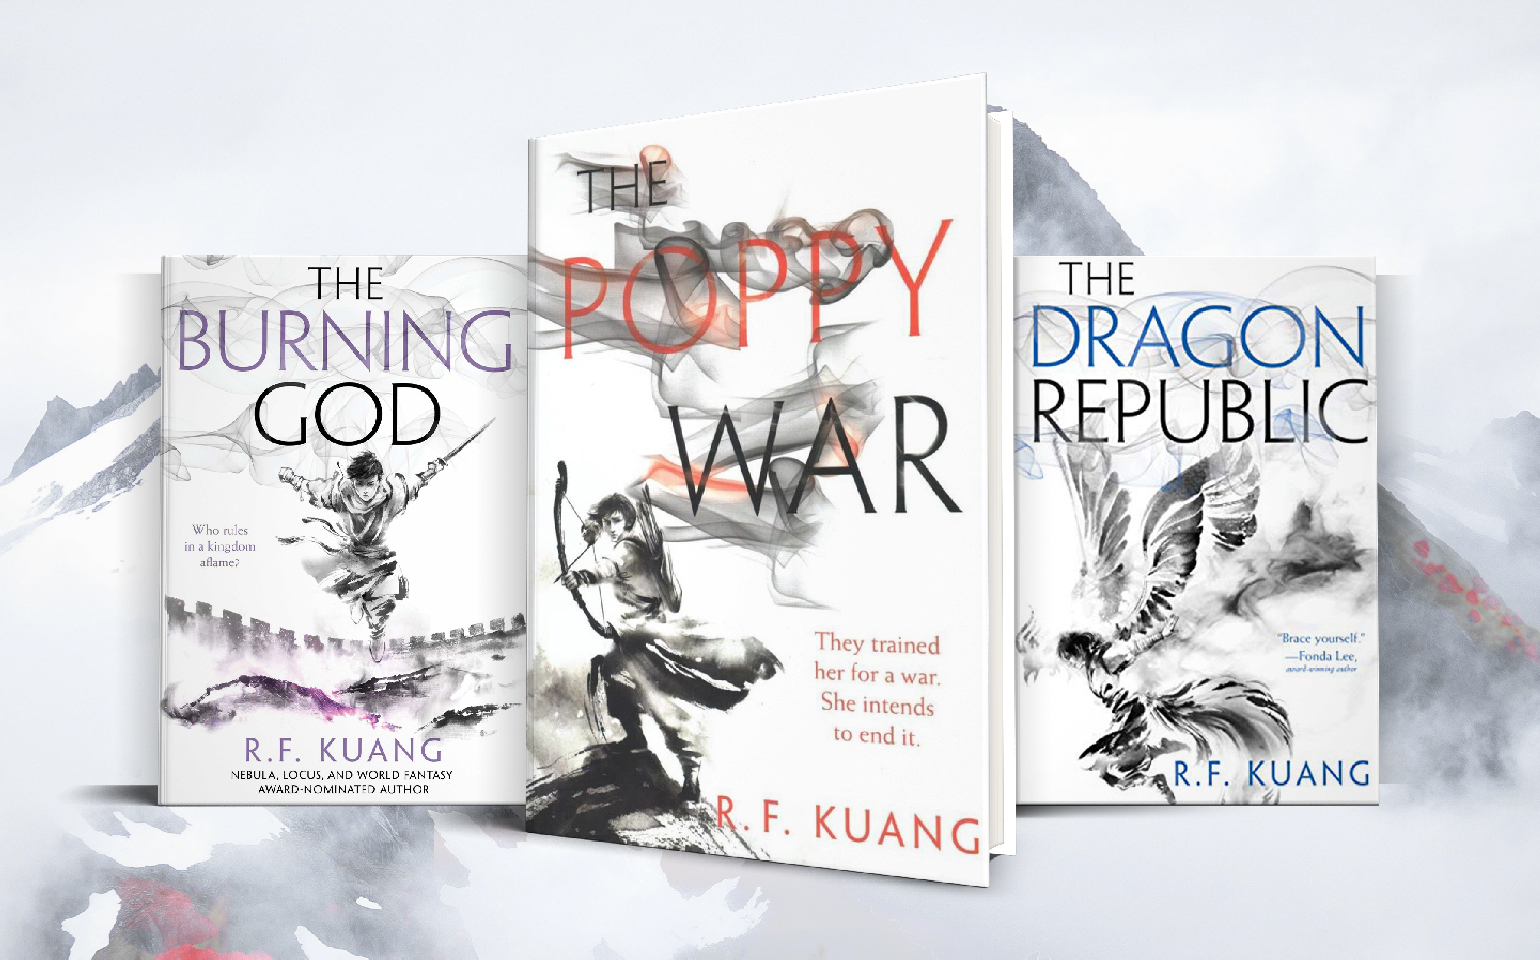 The cover of R.F. Kuang's The Poppy War is shown, which features an archer aiming a bow and arrow.